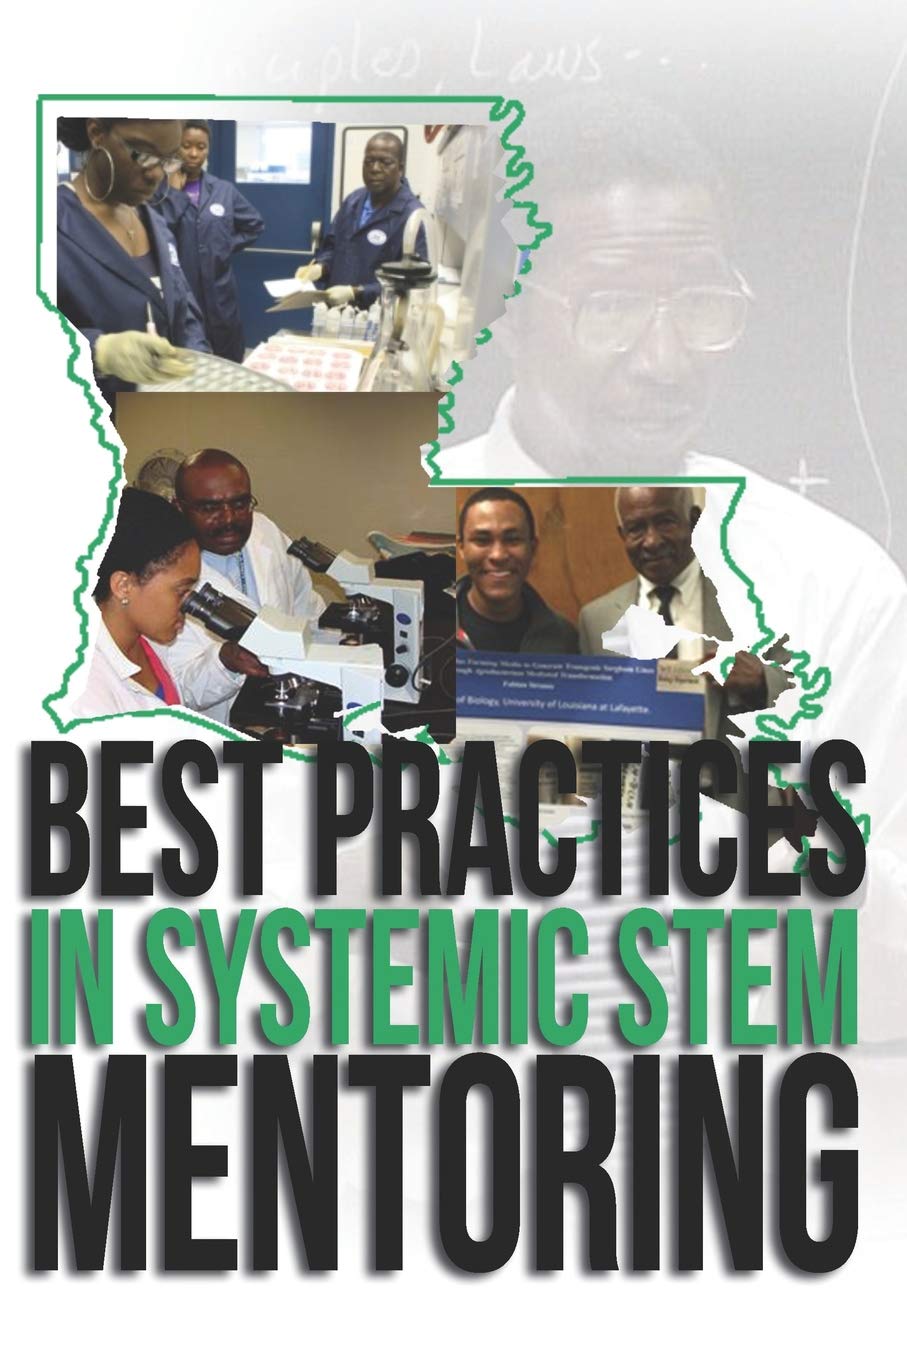 Best Practices in Systemic STEM Mentoring at Southern University and A&M College in Baton Rouge (SUBR), Louisiana